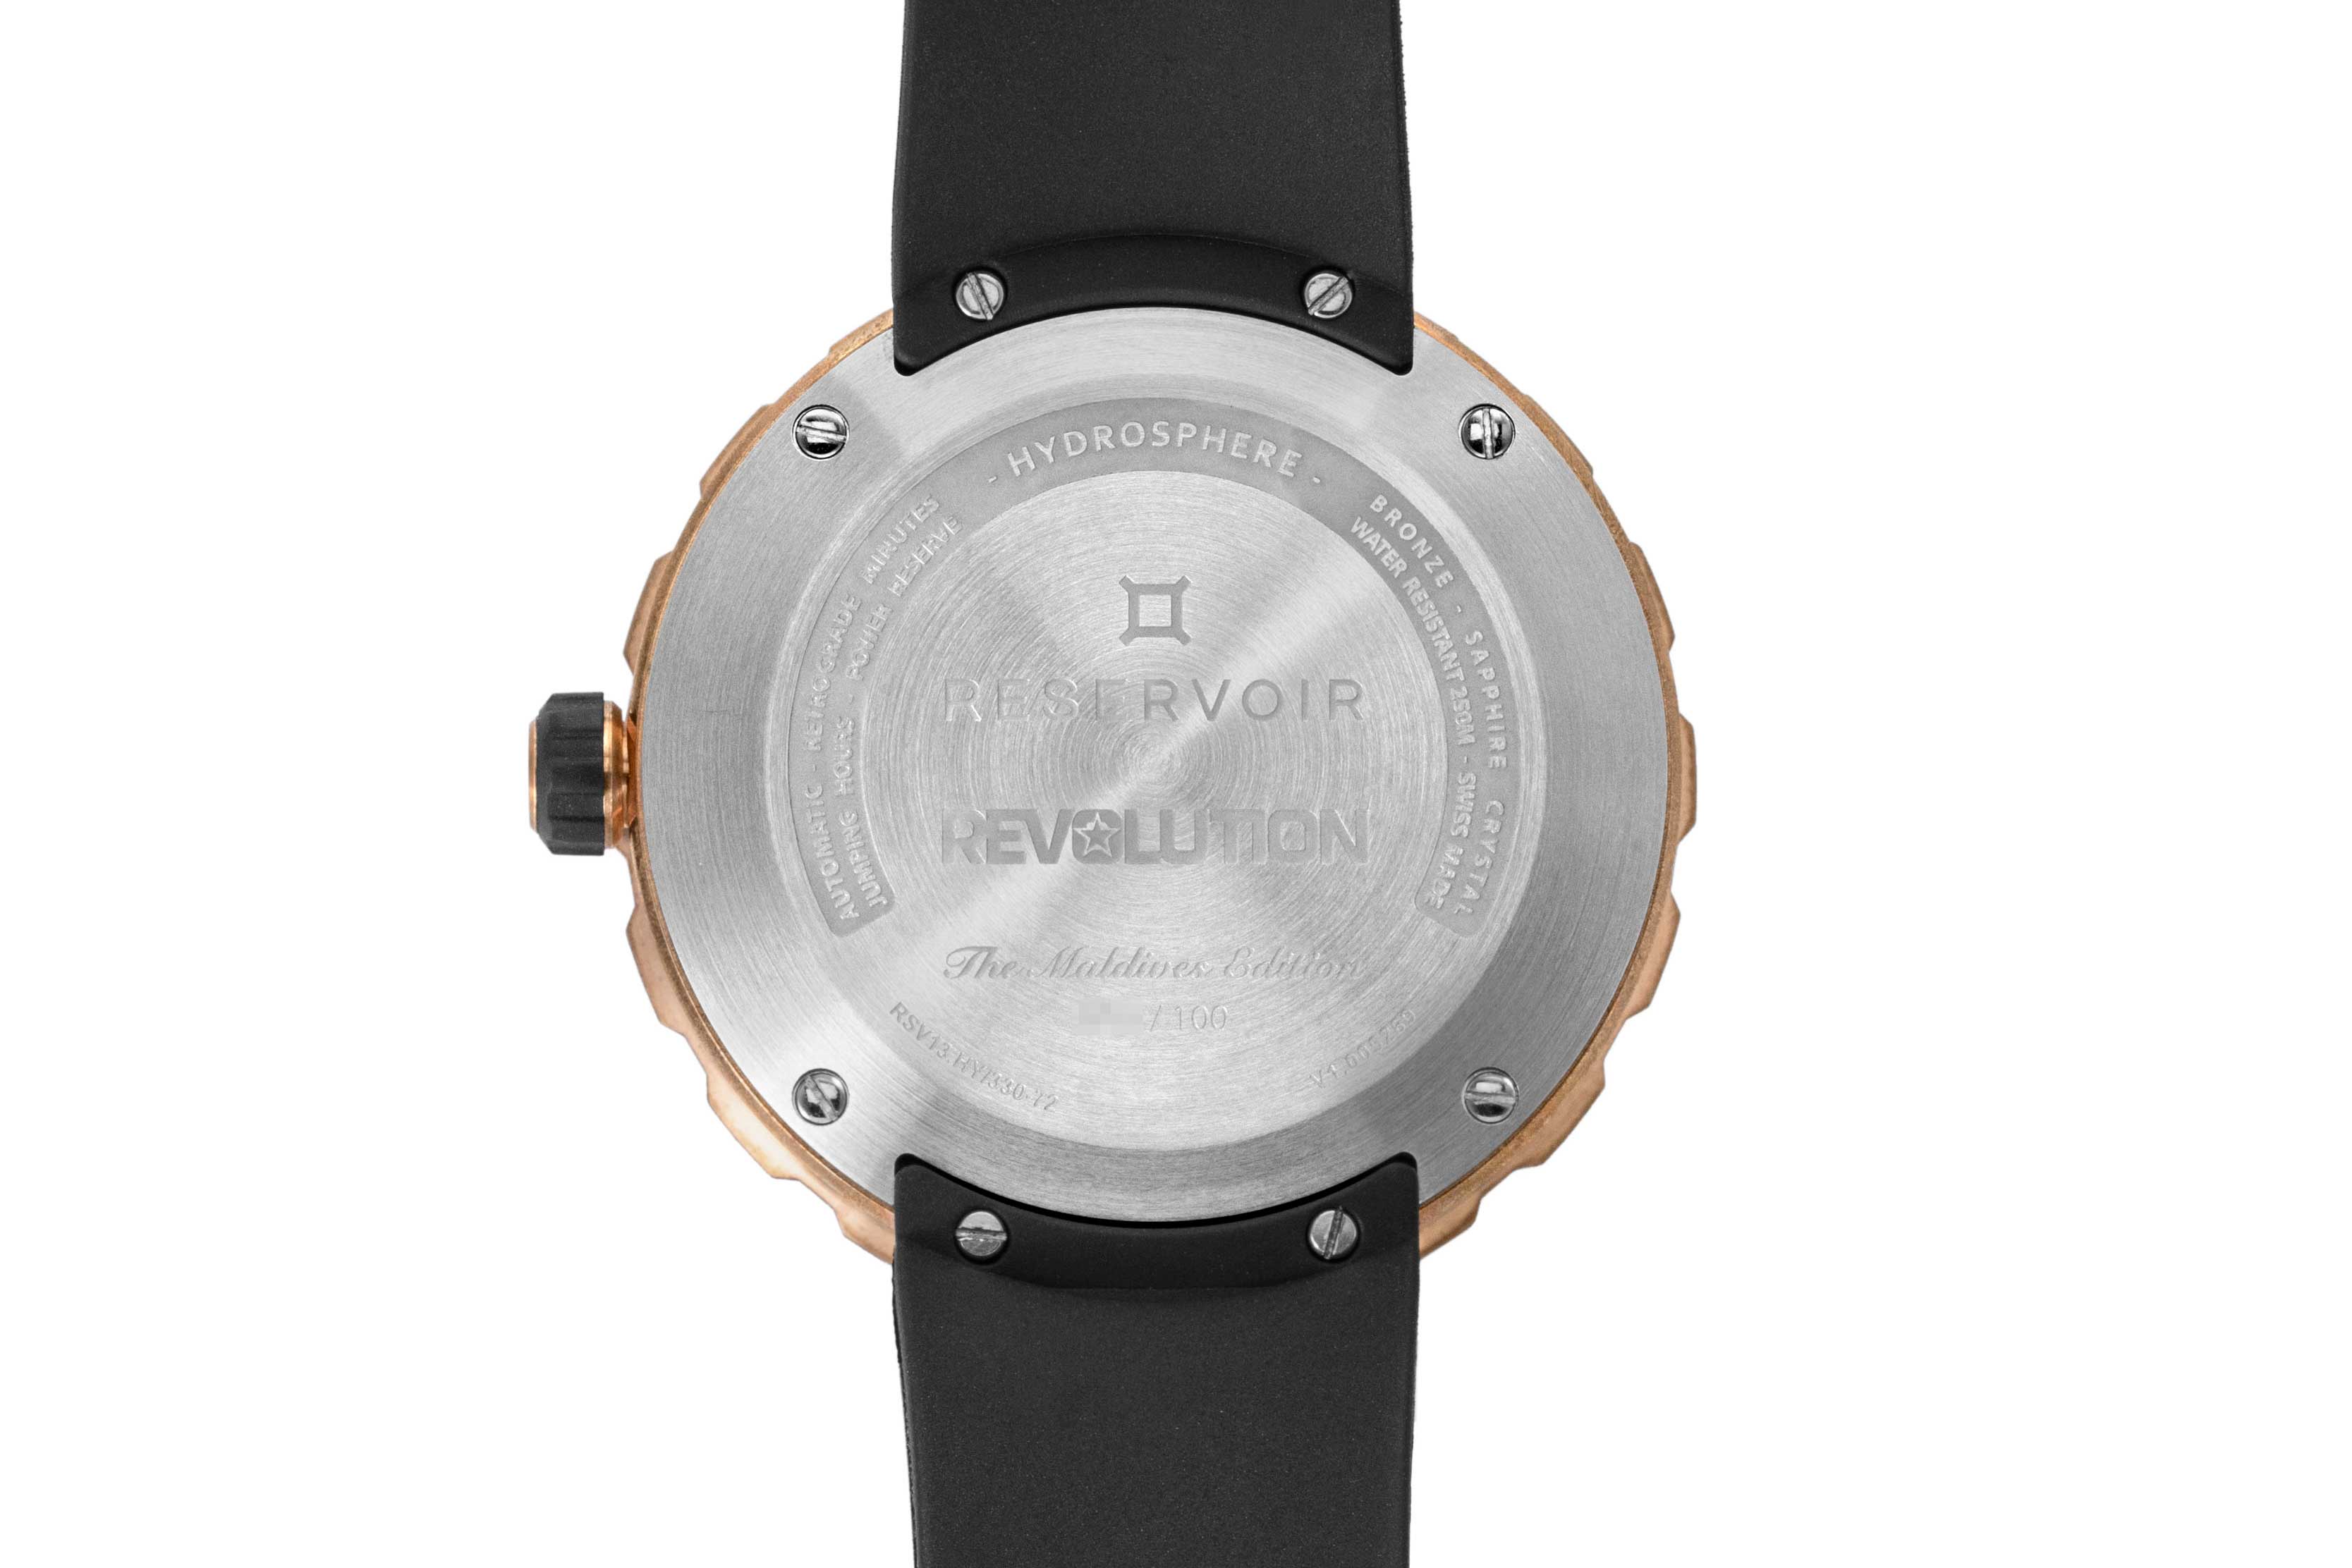 Each Reservoir Hydrosphere Bronze x Revolution “The Maldives Edition” is numbered and engraved on the caseback (©Revolution)